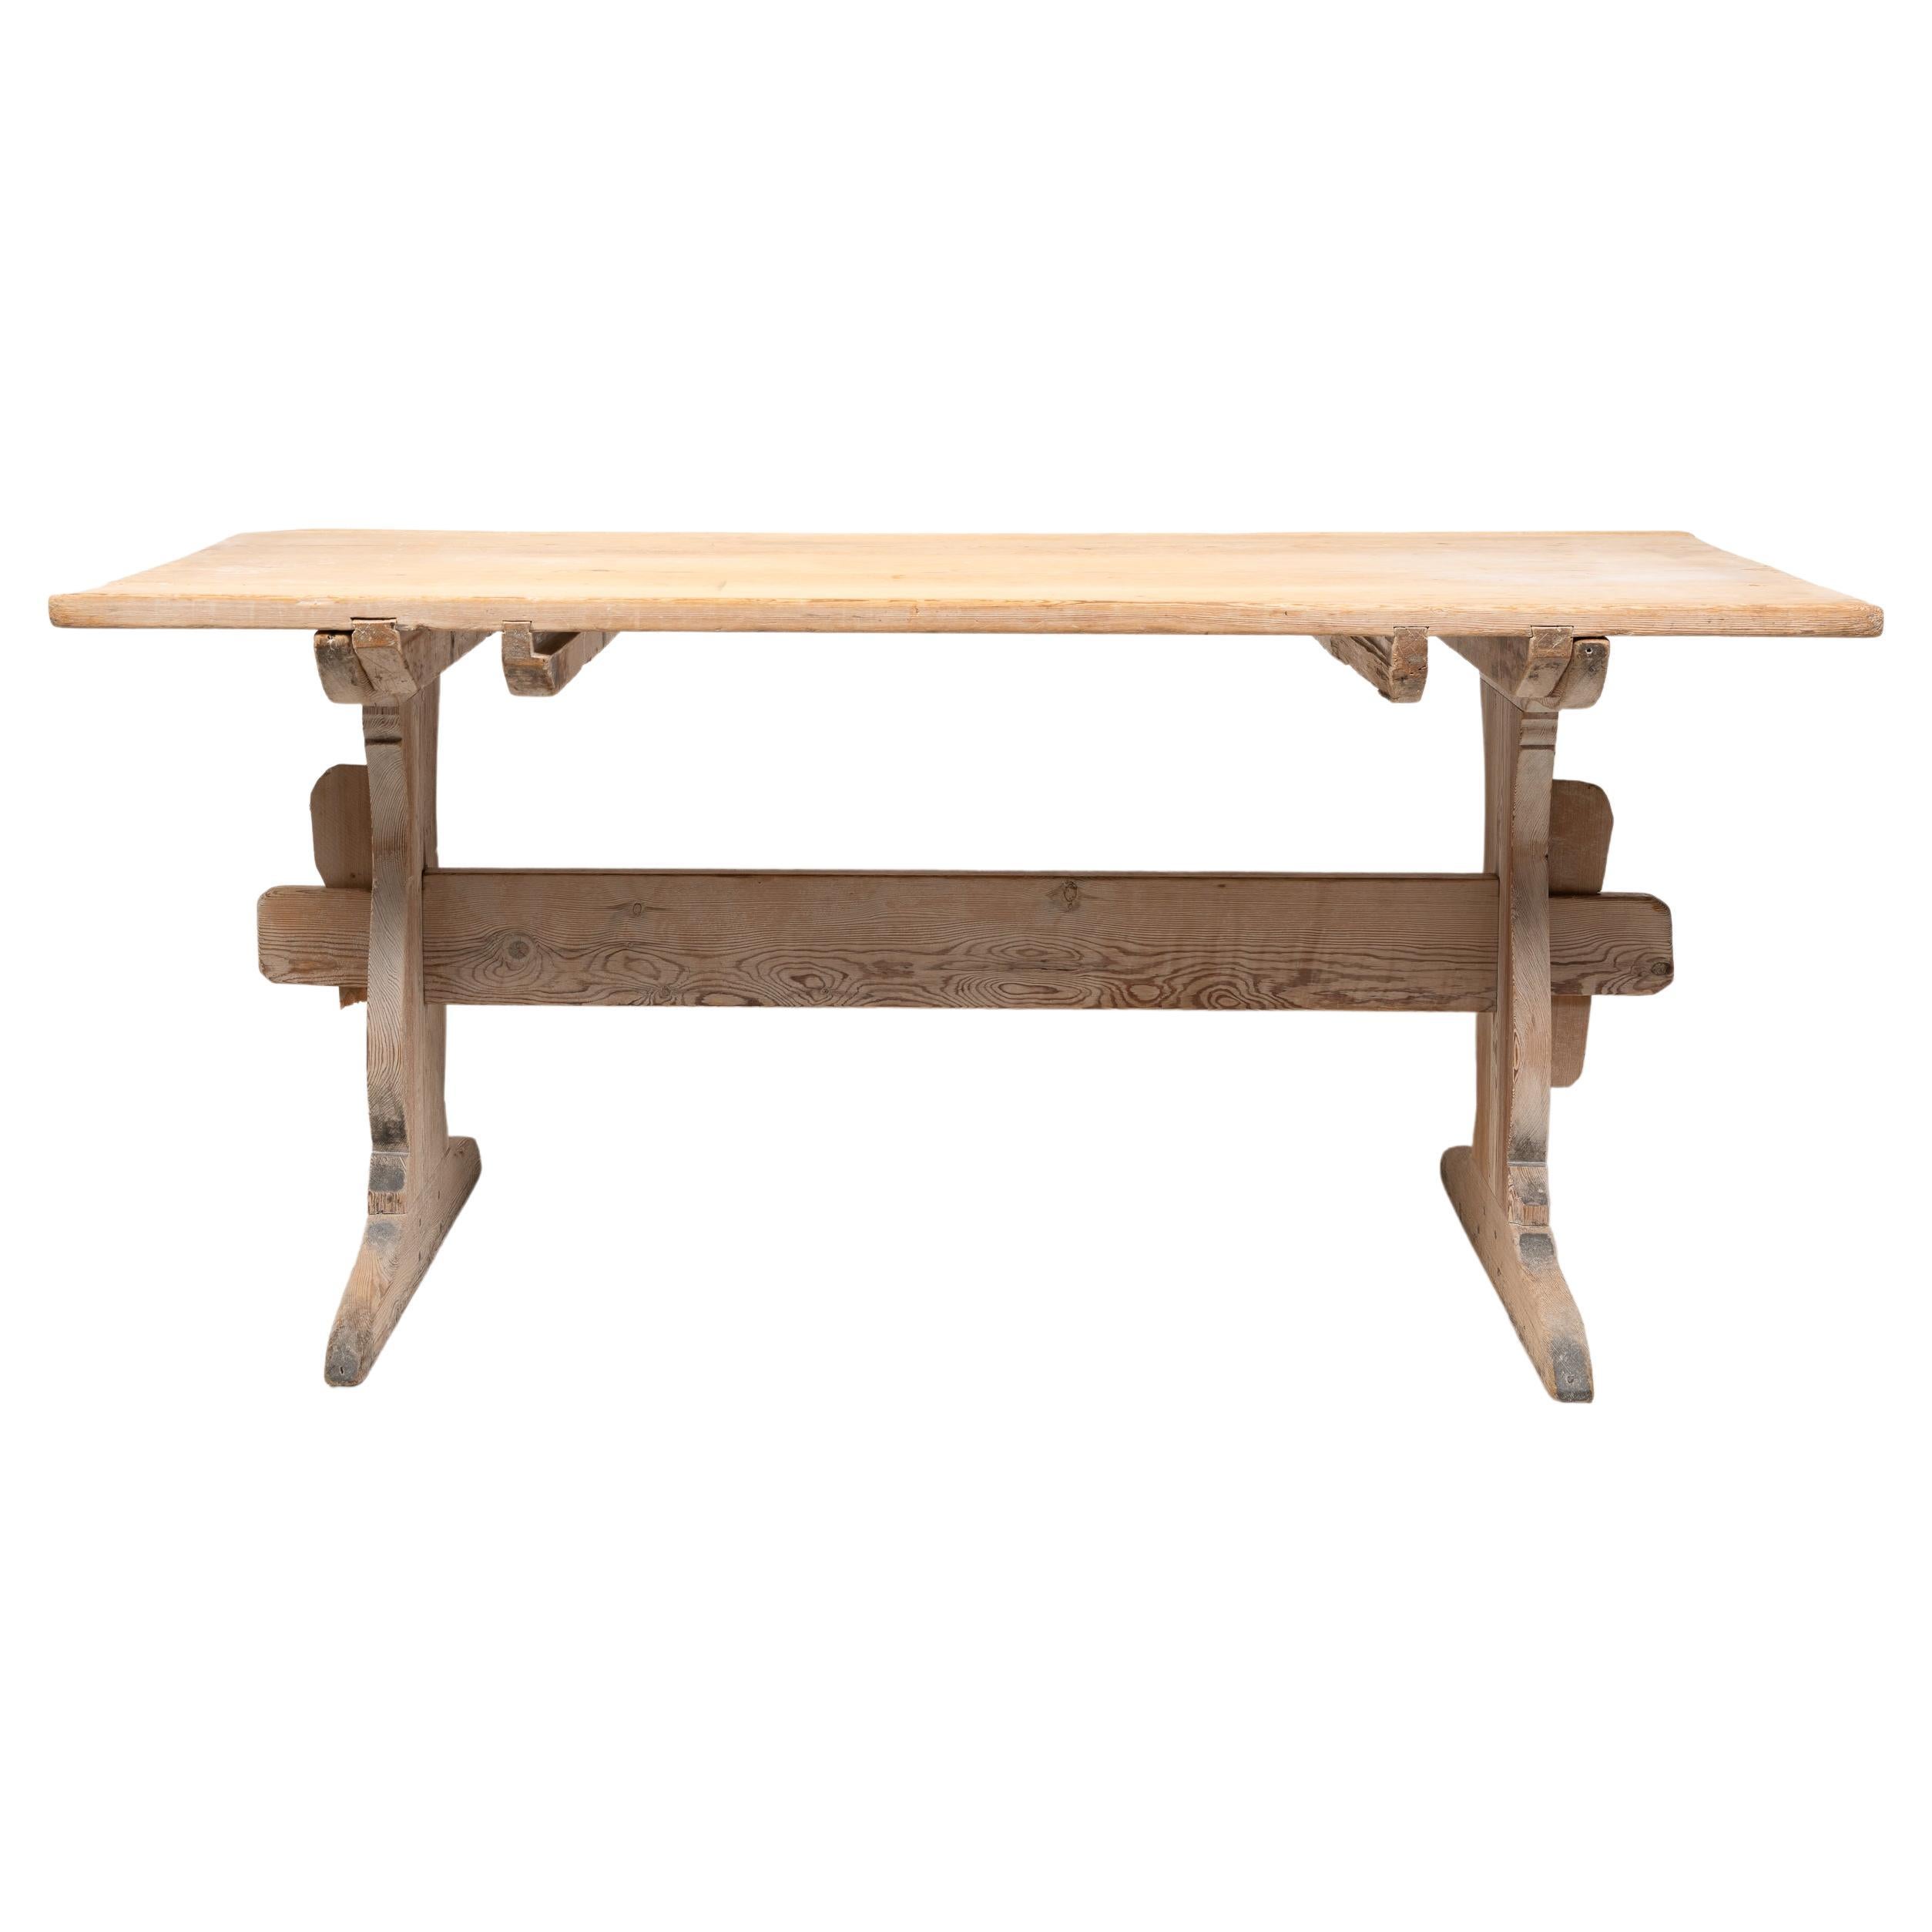 Swedish country house dining table in pine. The table is a so called trestle table and an authentic northern Swedish country furniture in folk art. Made completely by hand the table is from the late 1700s. It has a table top in solid pine which